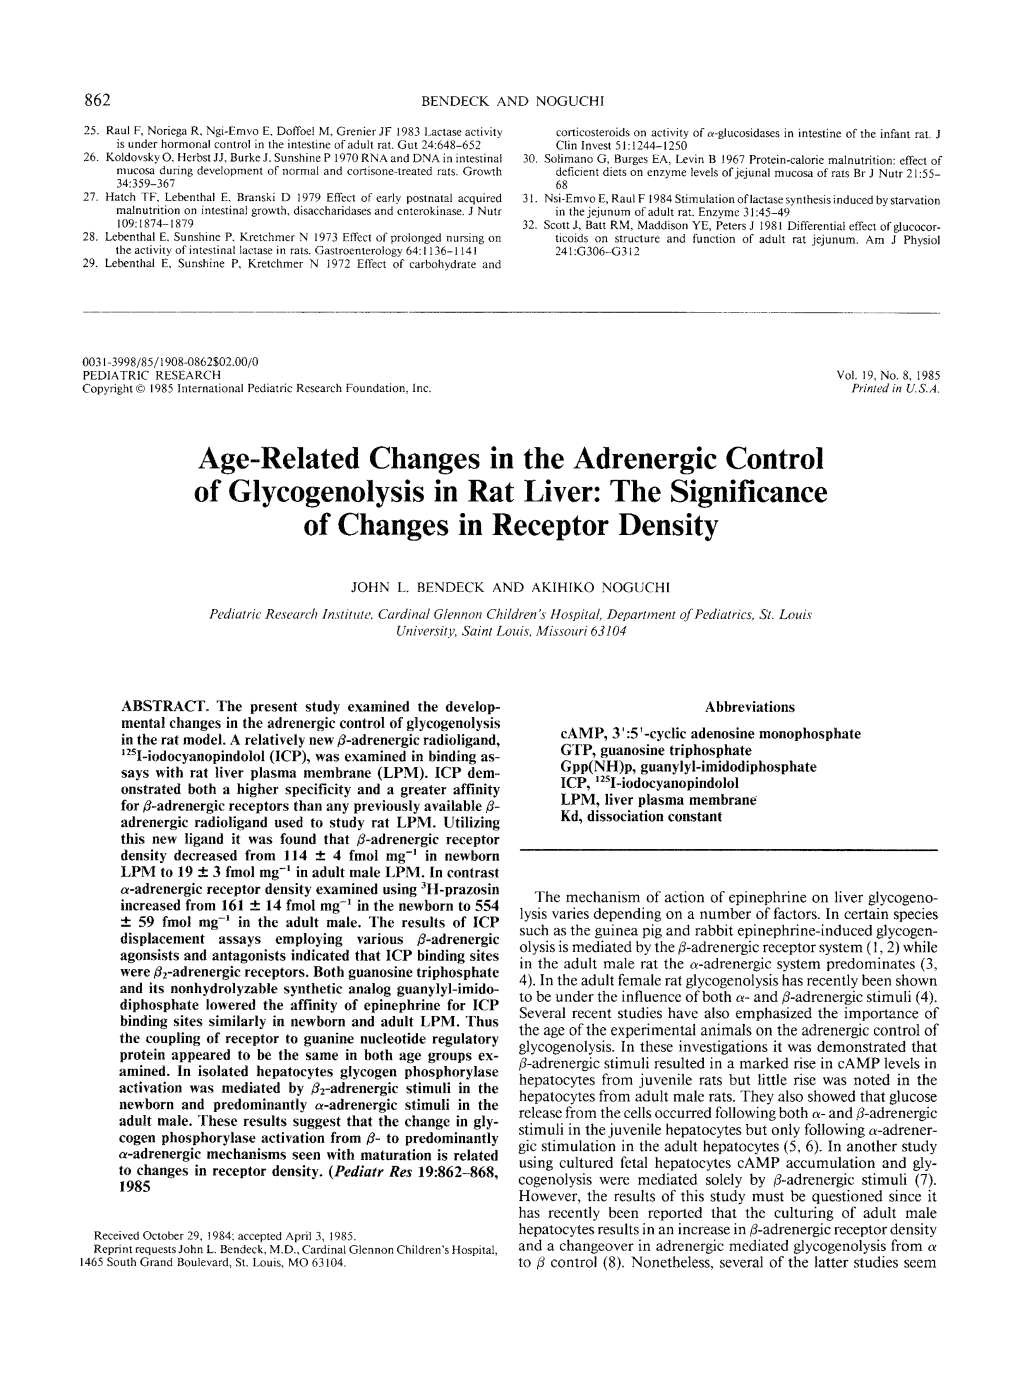 Age-Related Changes in the Adrenergic Control of Glycogenolysis in Rat Liver: the Significance of Changes in Receptor Density